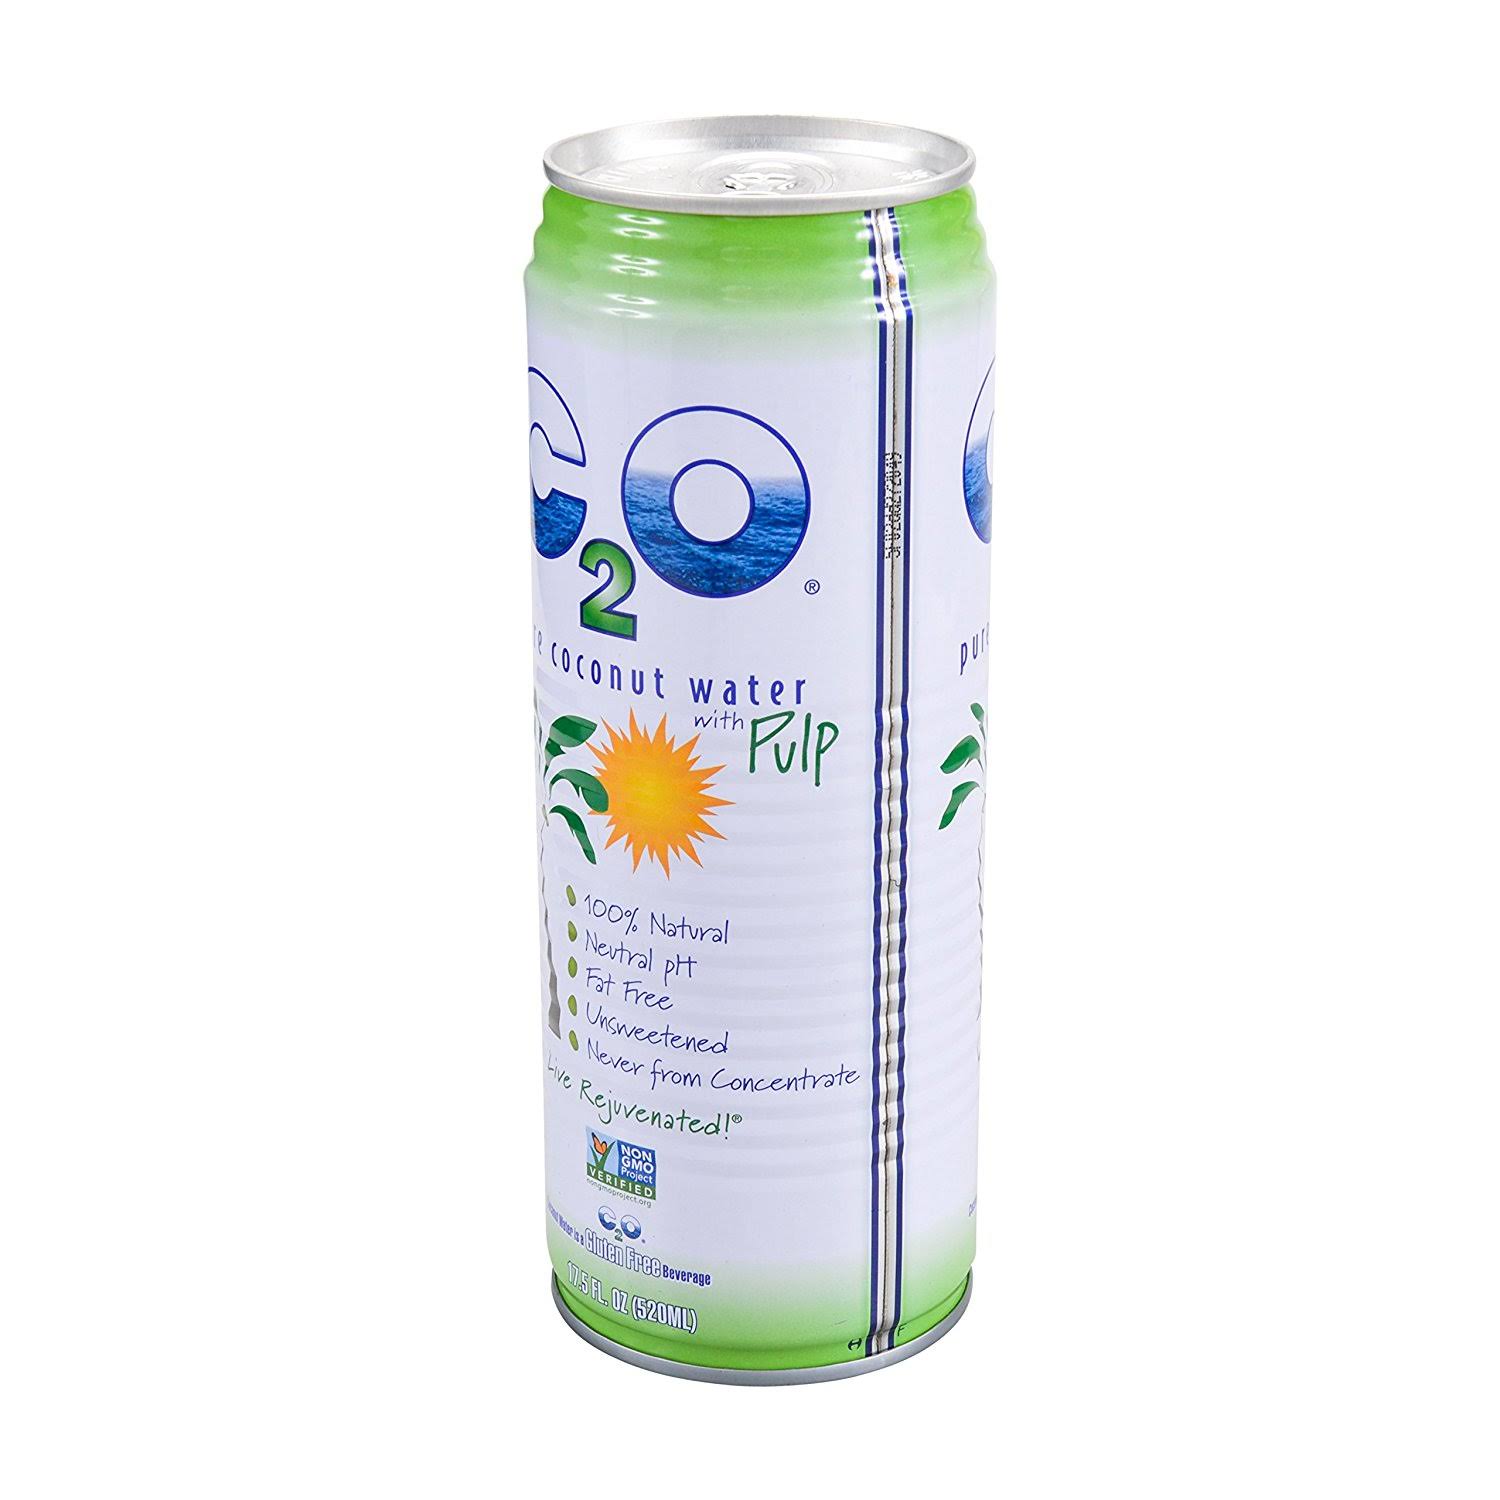 C2O Pure Coconut Water - with Pulp, Unsweetened, 17.5oz